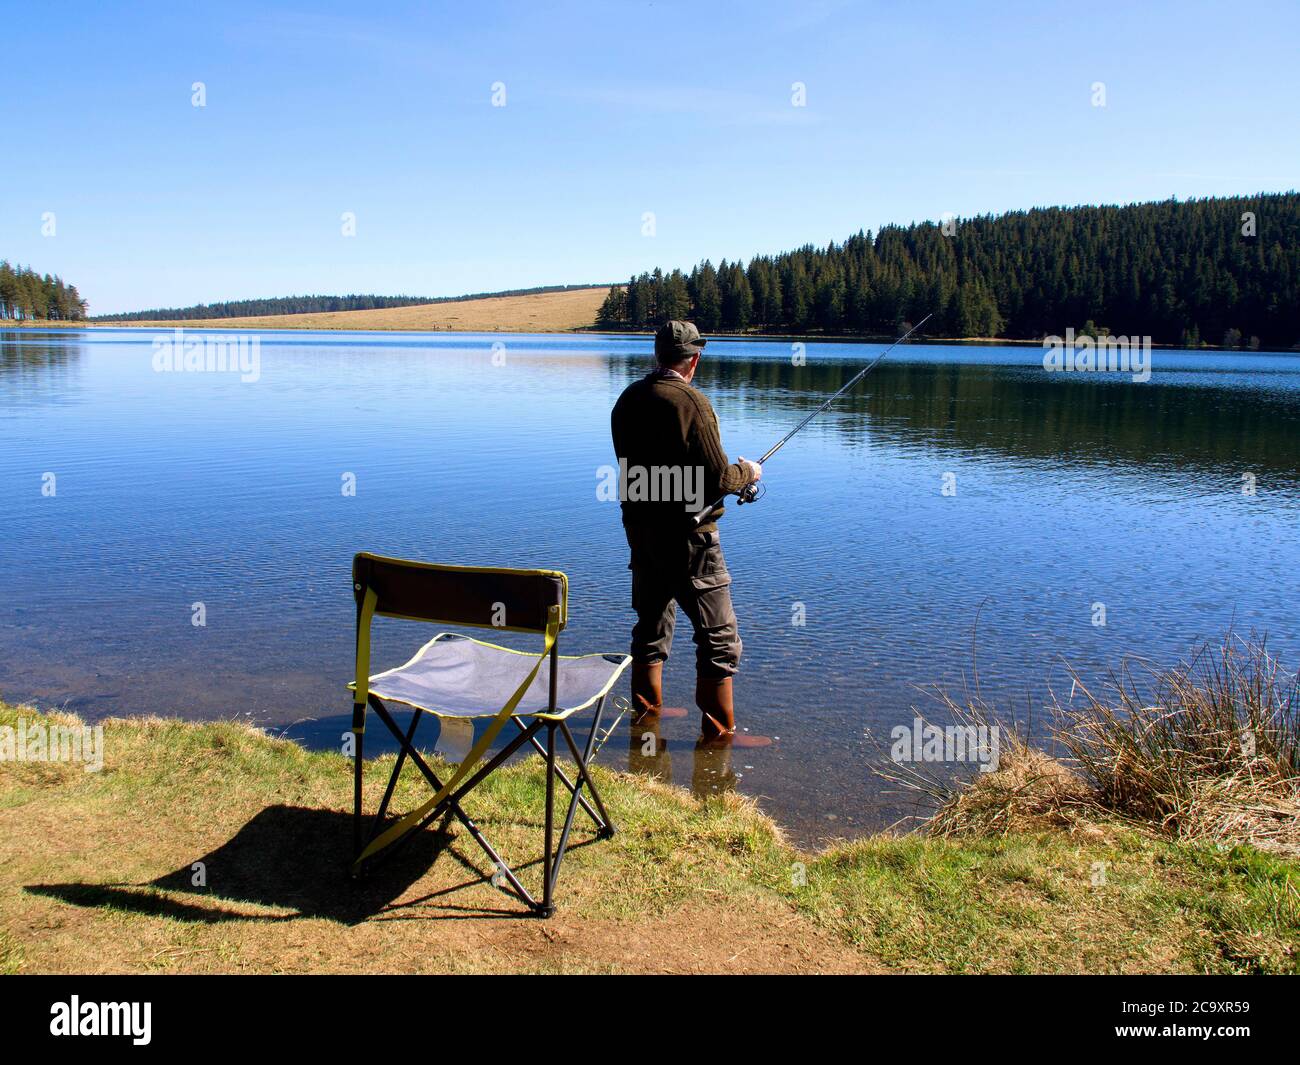 Fisherman fishing in  lake Servieres , Puy de Dome, Auvergne-Rhone-Alpes, France Stock Photo